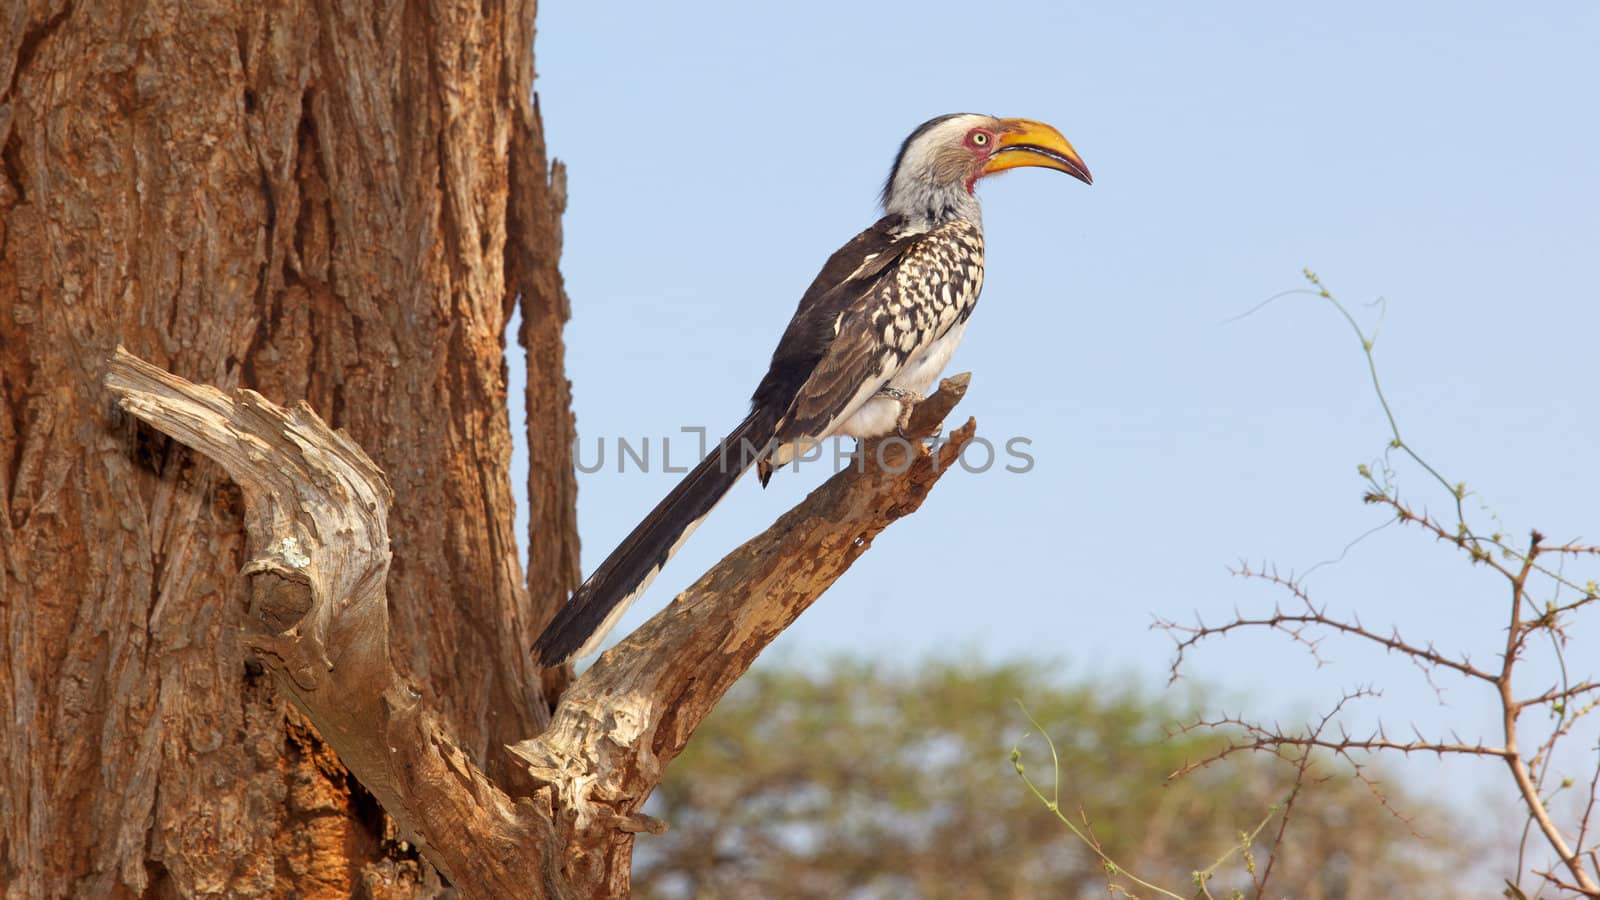 A Southern Yellow-Billed Hornbill in the Kruger National Park, South Africa.